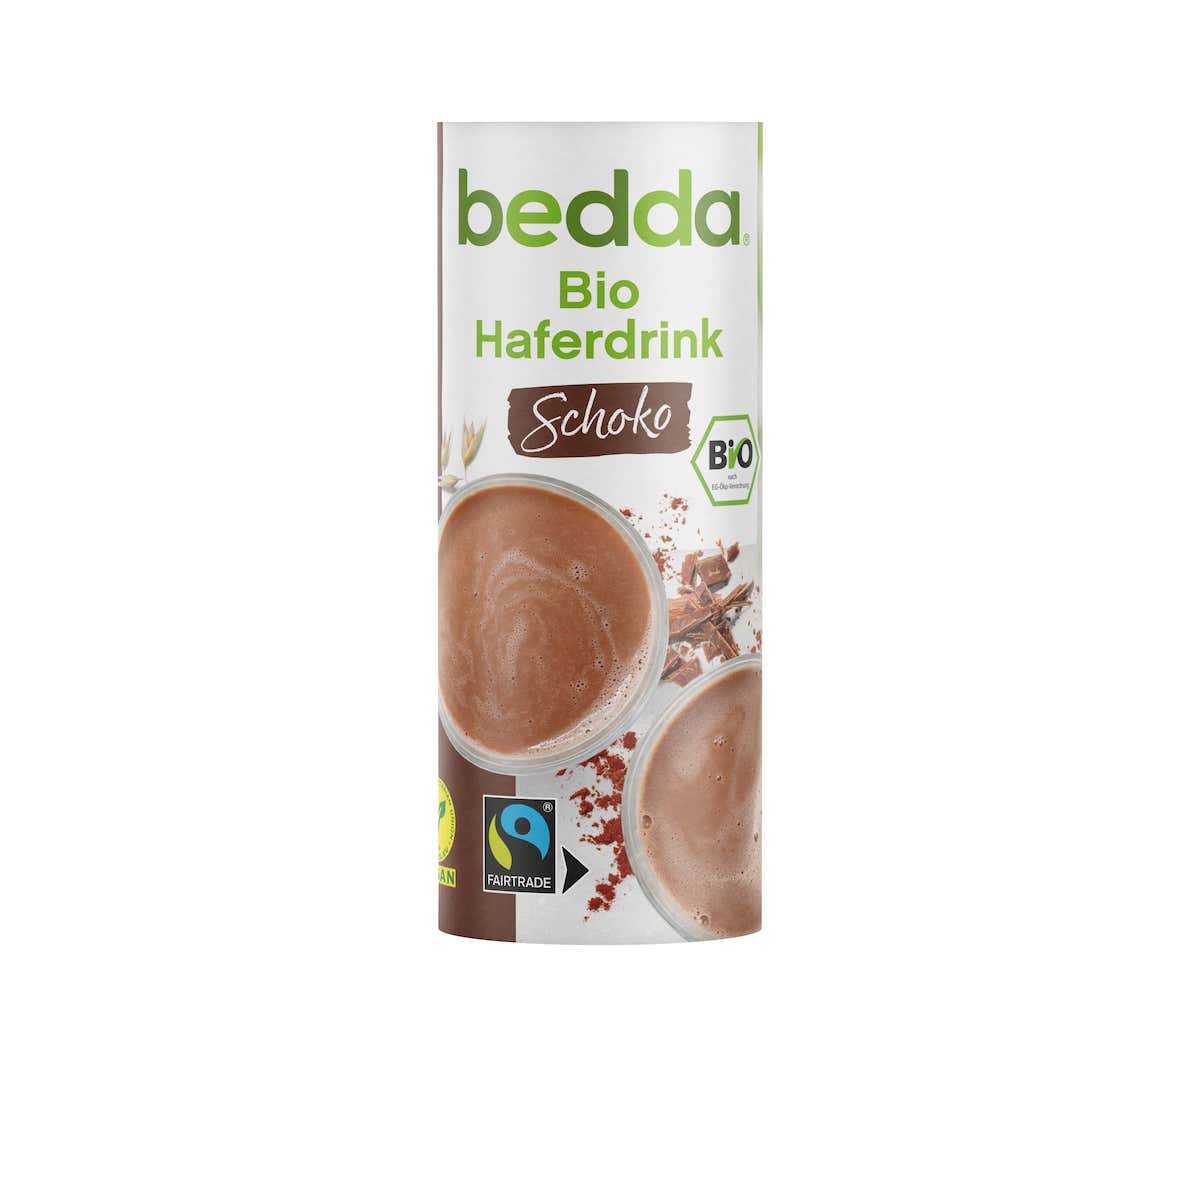 bedda oat drink chocolate The little chocolaty drinking break for on the go or at home. In a practical 235 ml cup.